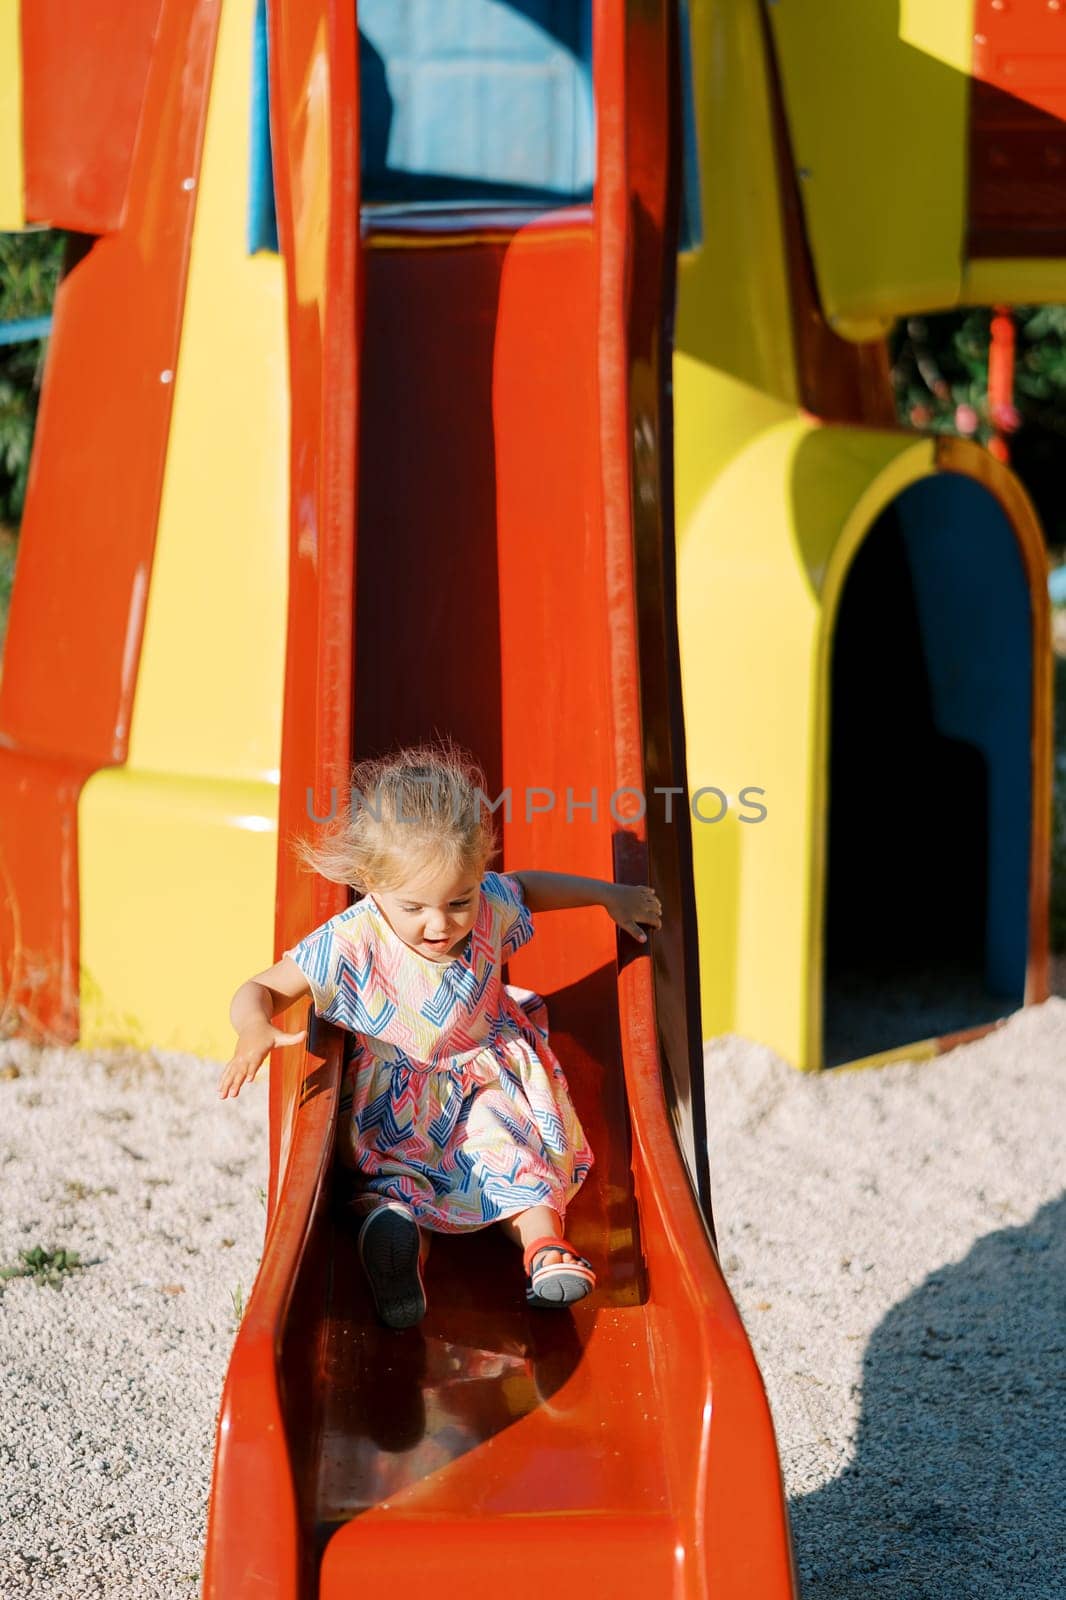 Little girl with flying hair slides down a slide holding onto a handrail. High quality photo